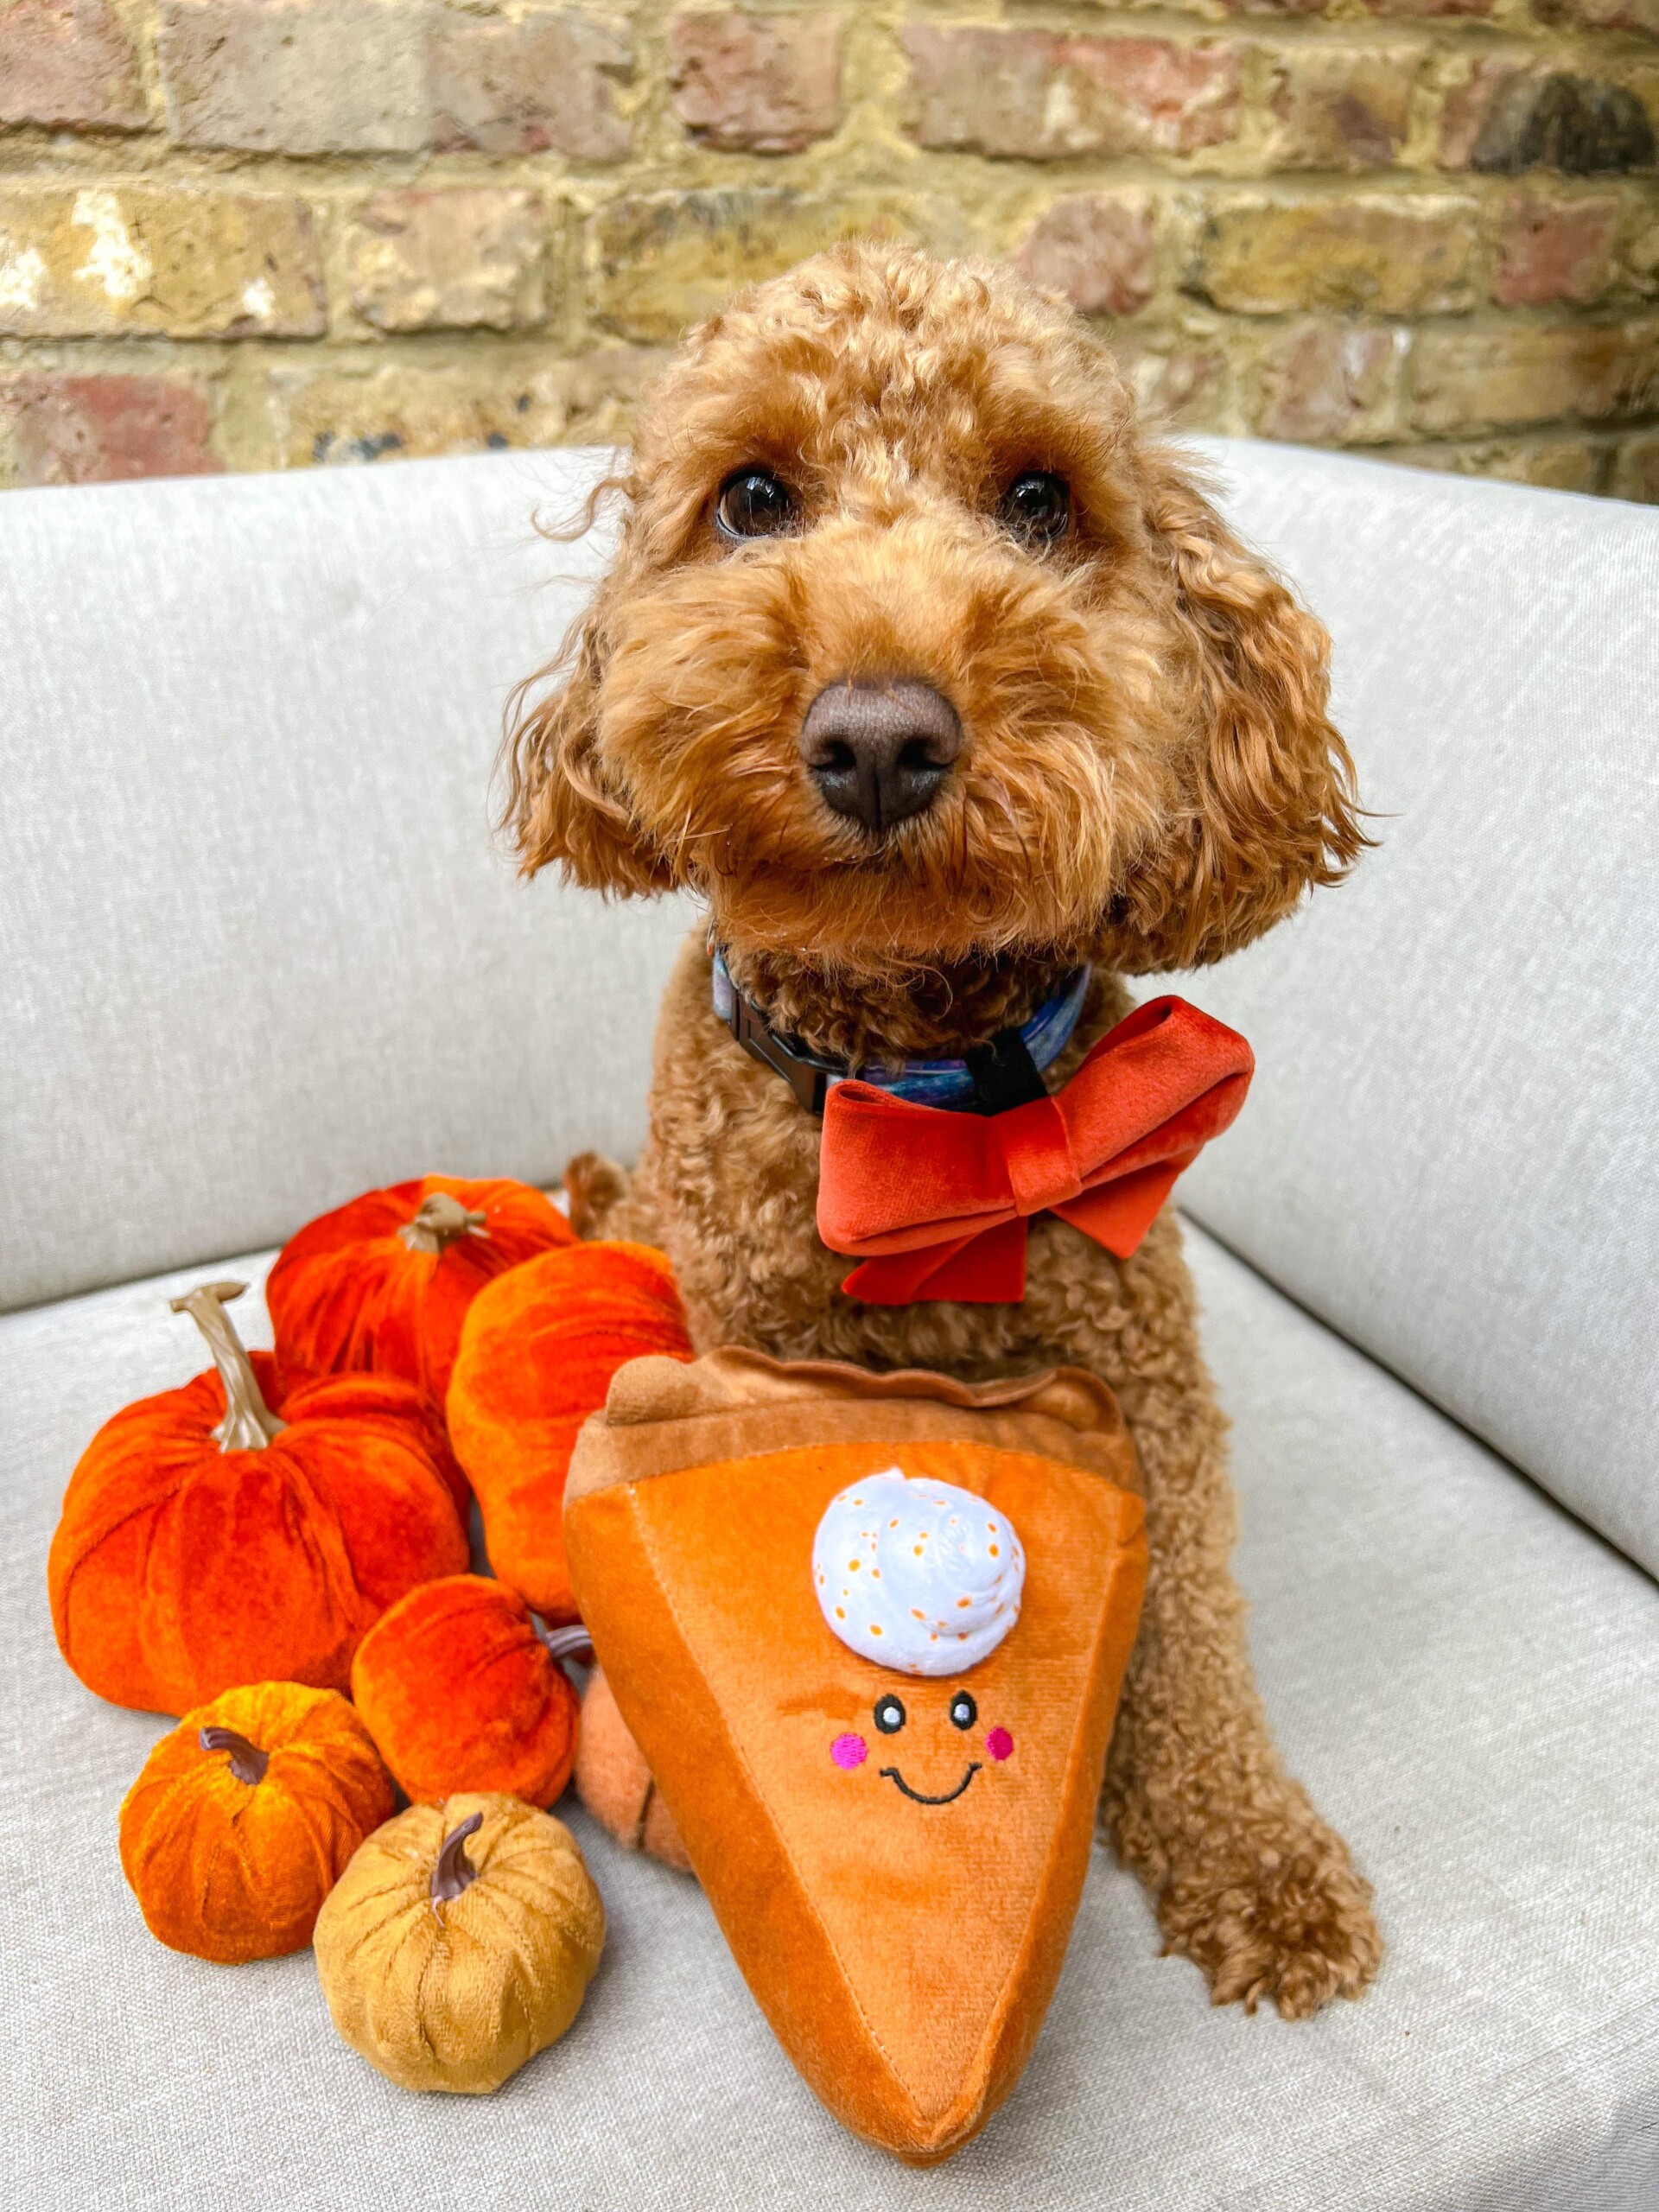 A cute red poodle surrounded by stylish autumn dog accessories, namely a squeaky slice of pumpkin pie toy 